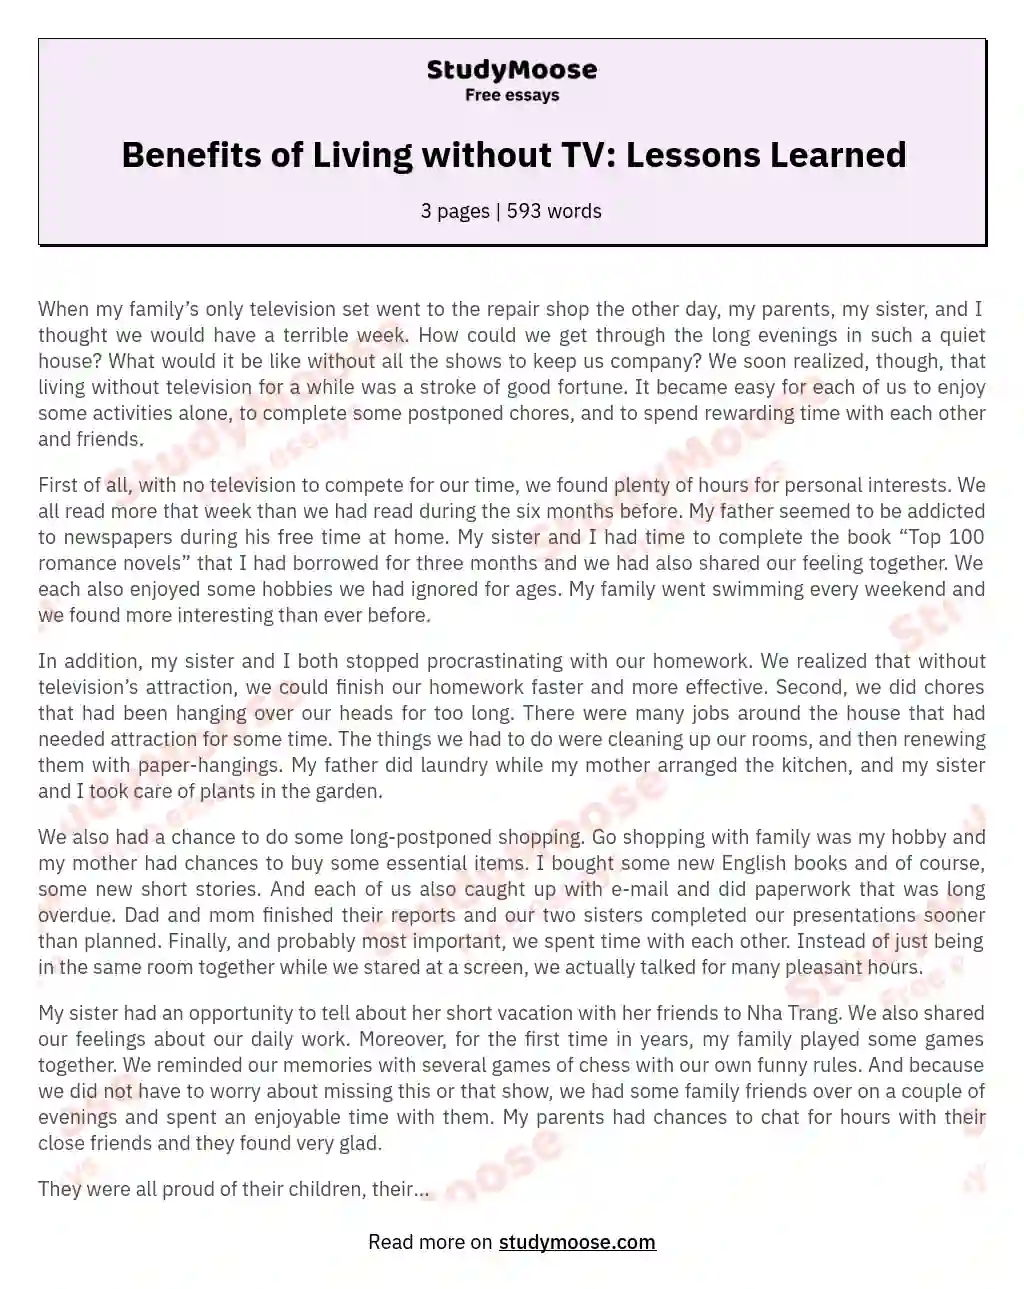 Benefits of Living without TV: Lessons Learned essay